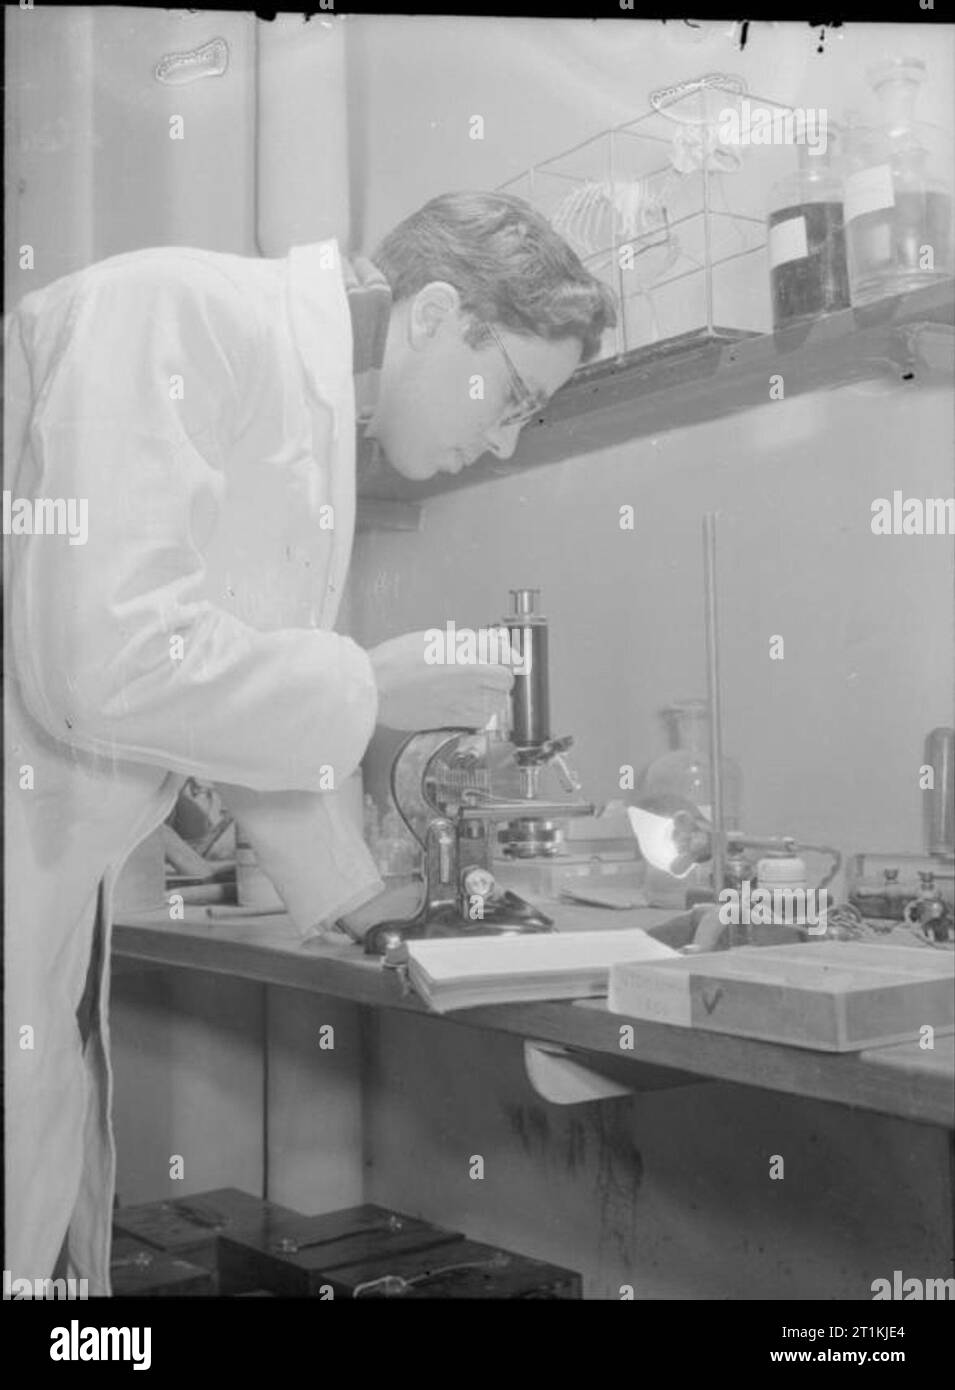 Colonial Students in Great Britain- Student at Guy's Medical School, London, England, UK, 1946 Mr Abdool Raman examines the stomach of a frog under a microscope at Guy's Medical School. On a shelf above him can be seen the skeleton of a hare. Stock Photo